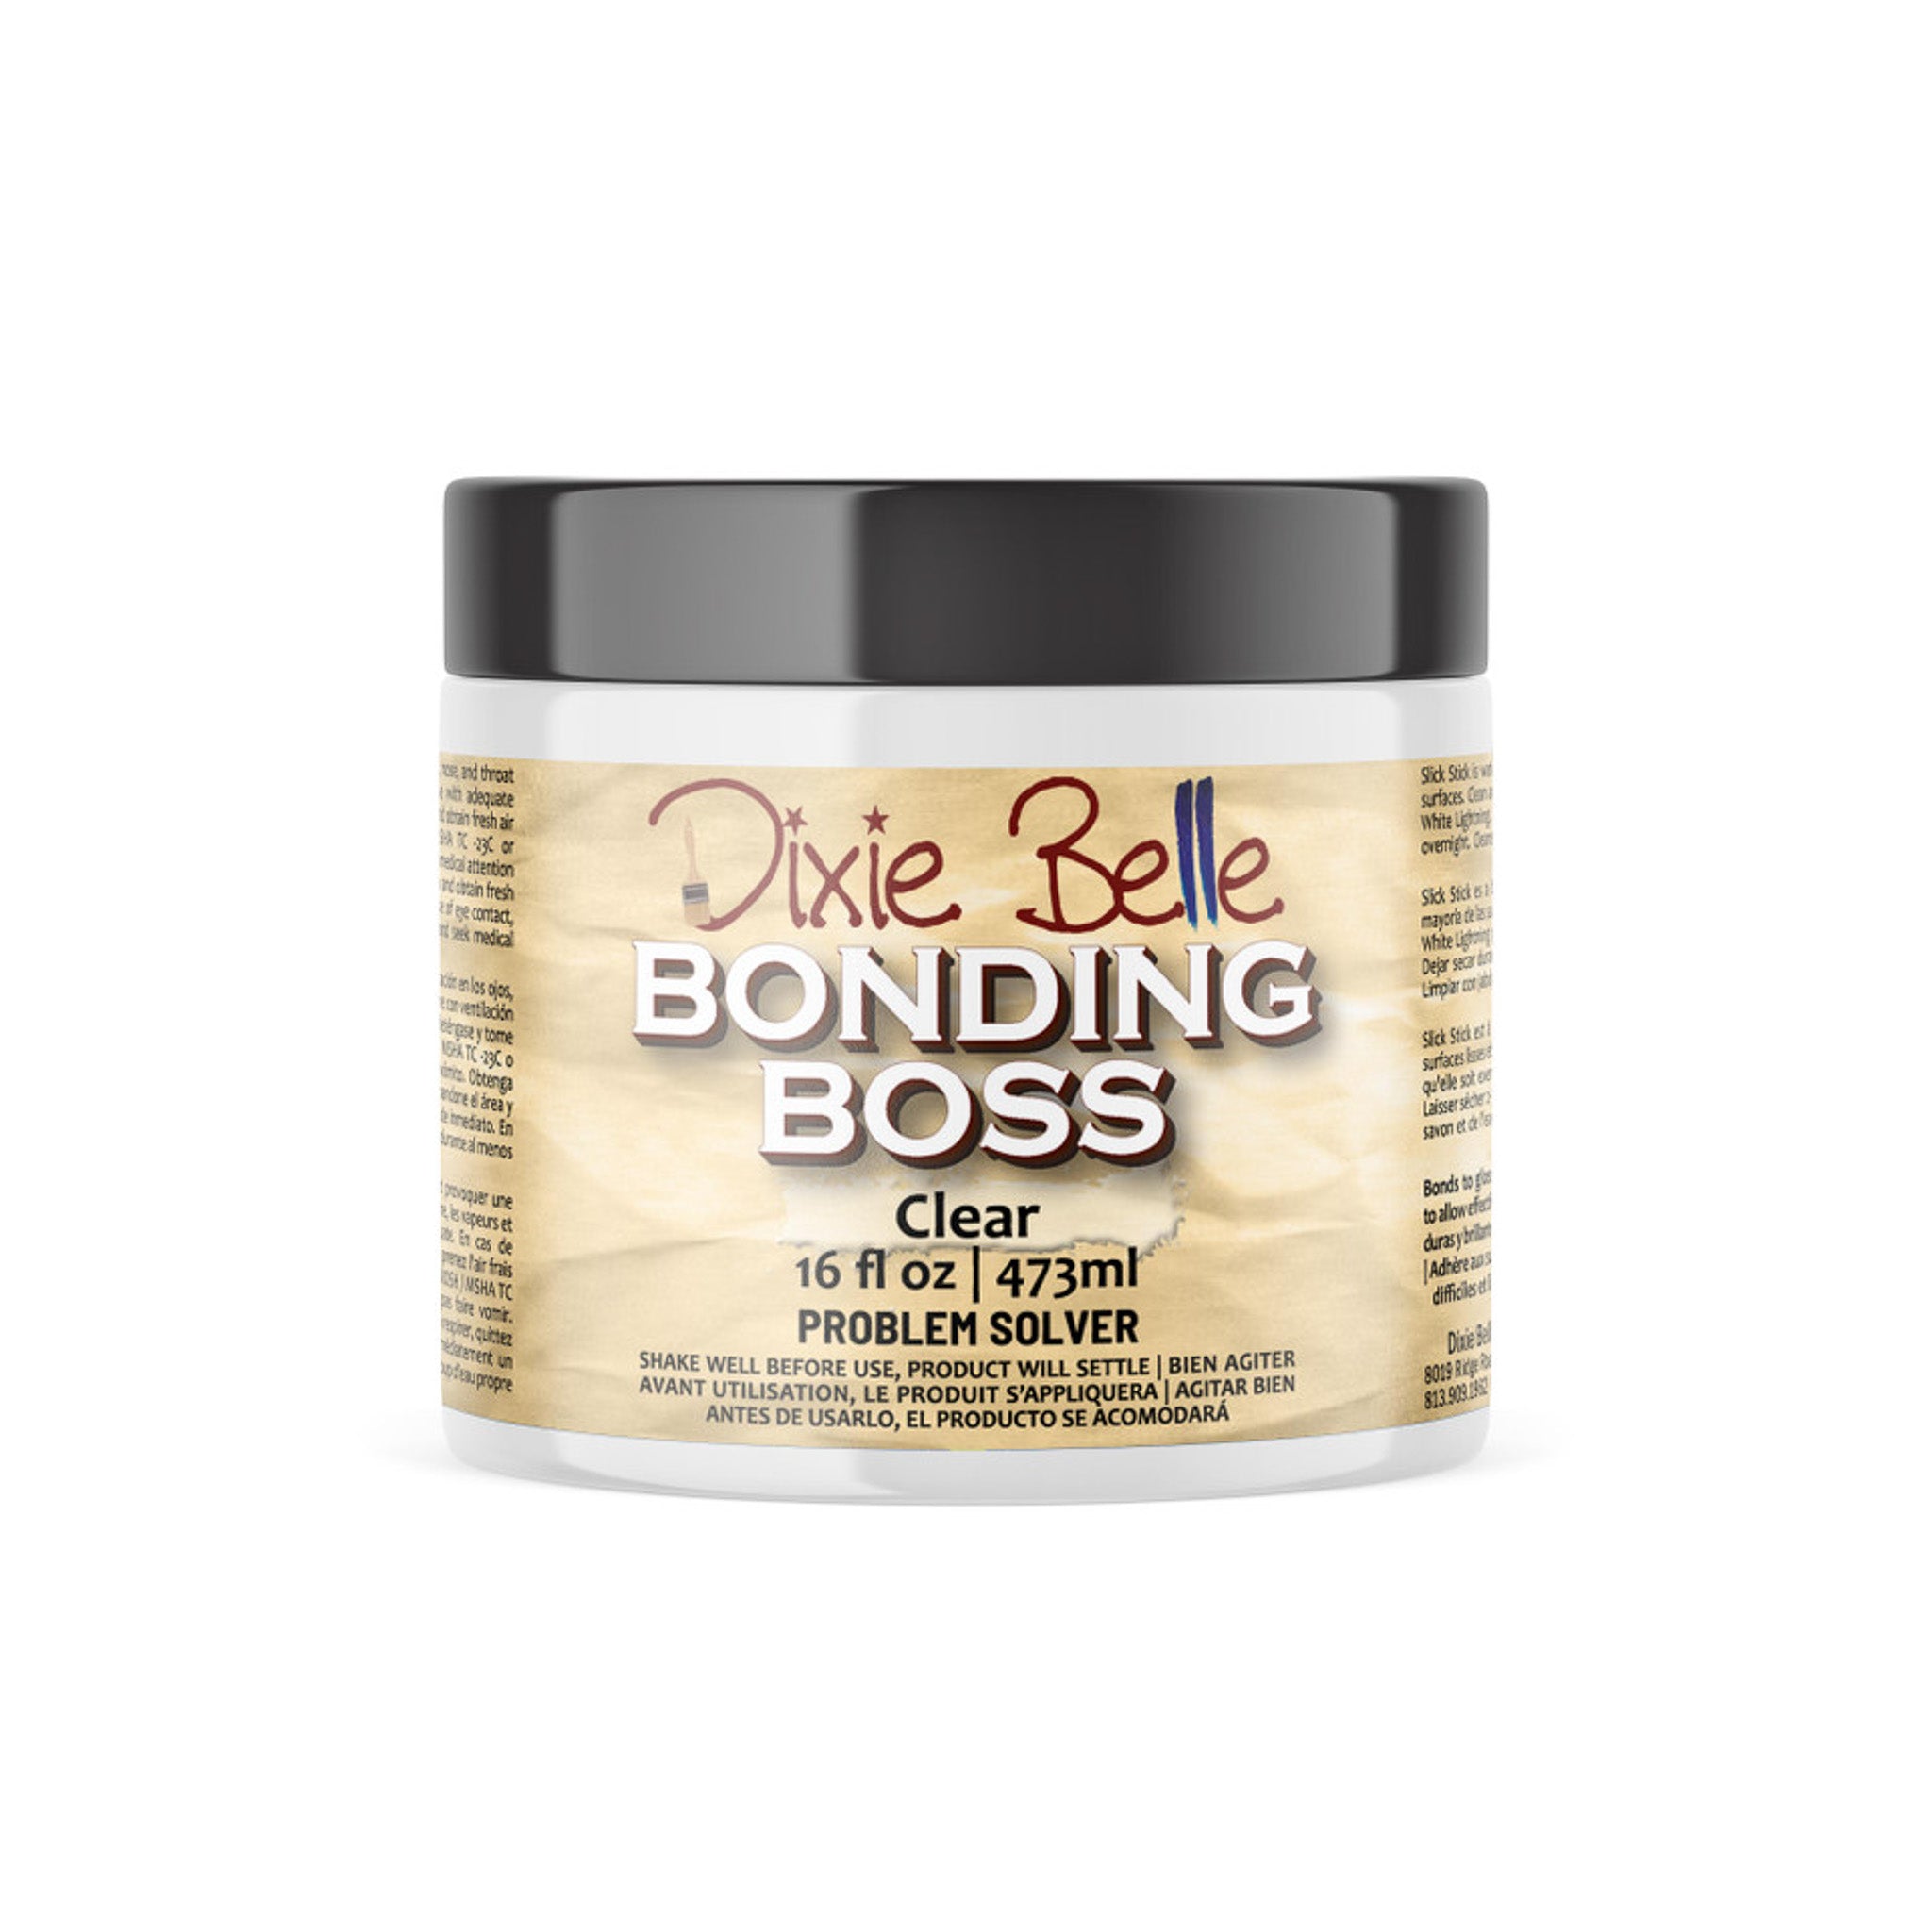 A 16oz container of Dixie Belle's Bonding Boss in Clear is against a white background.